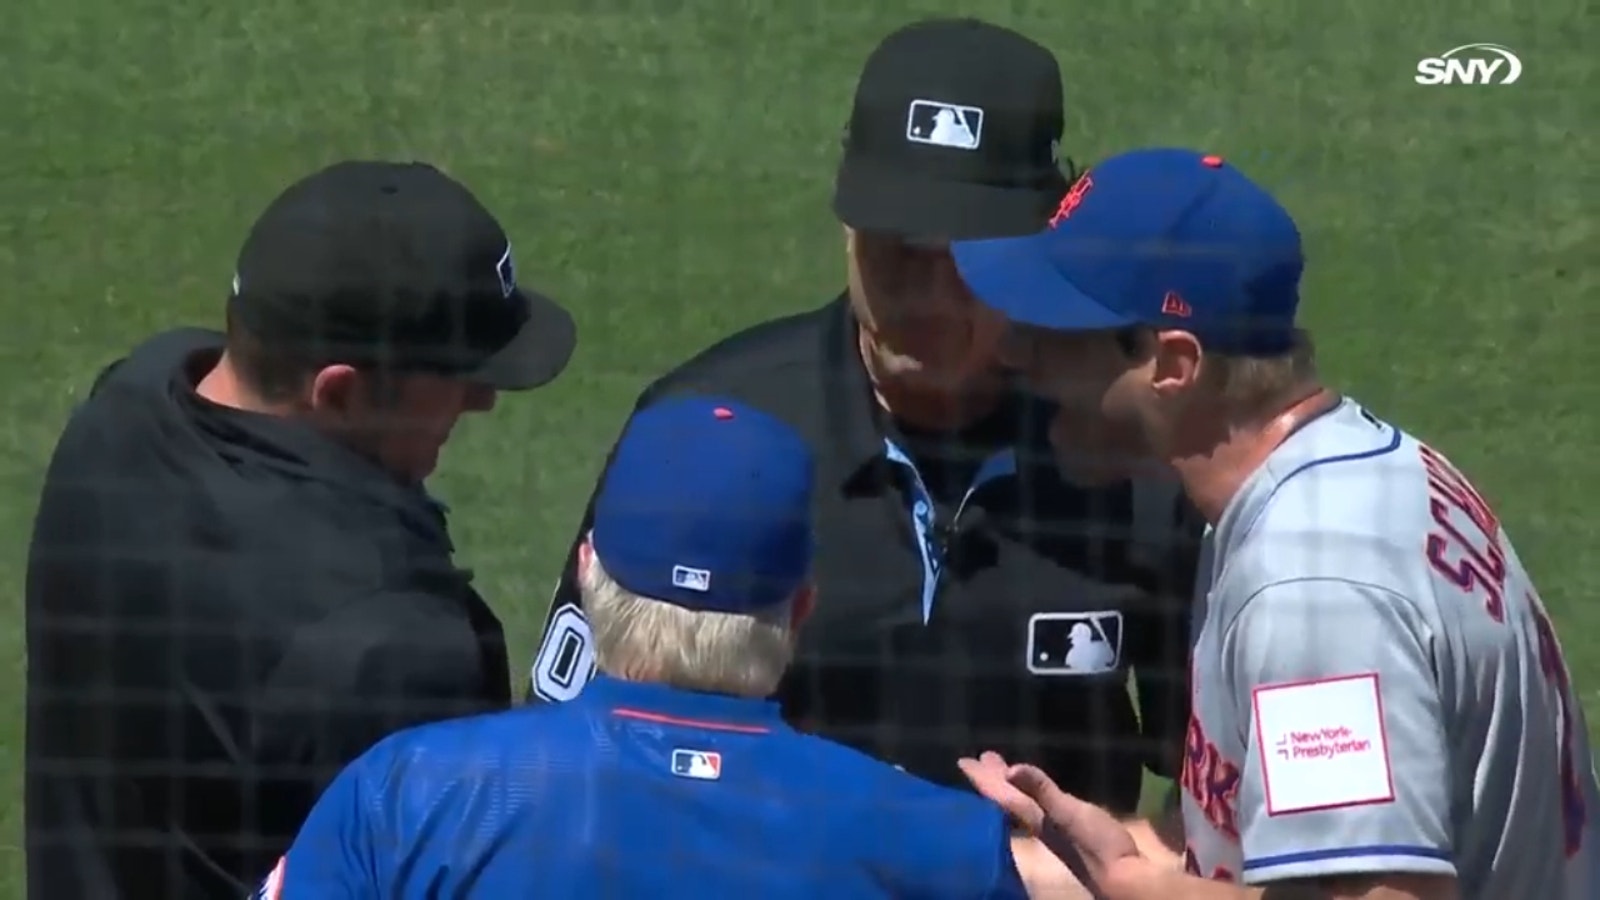 Mets Max Scherzer is ejected for having a sticky substance on his hand